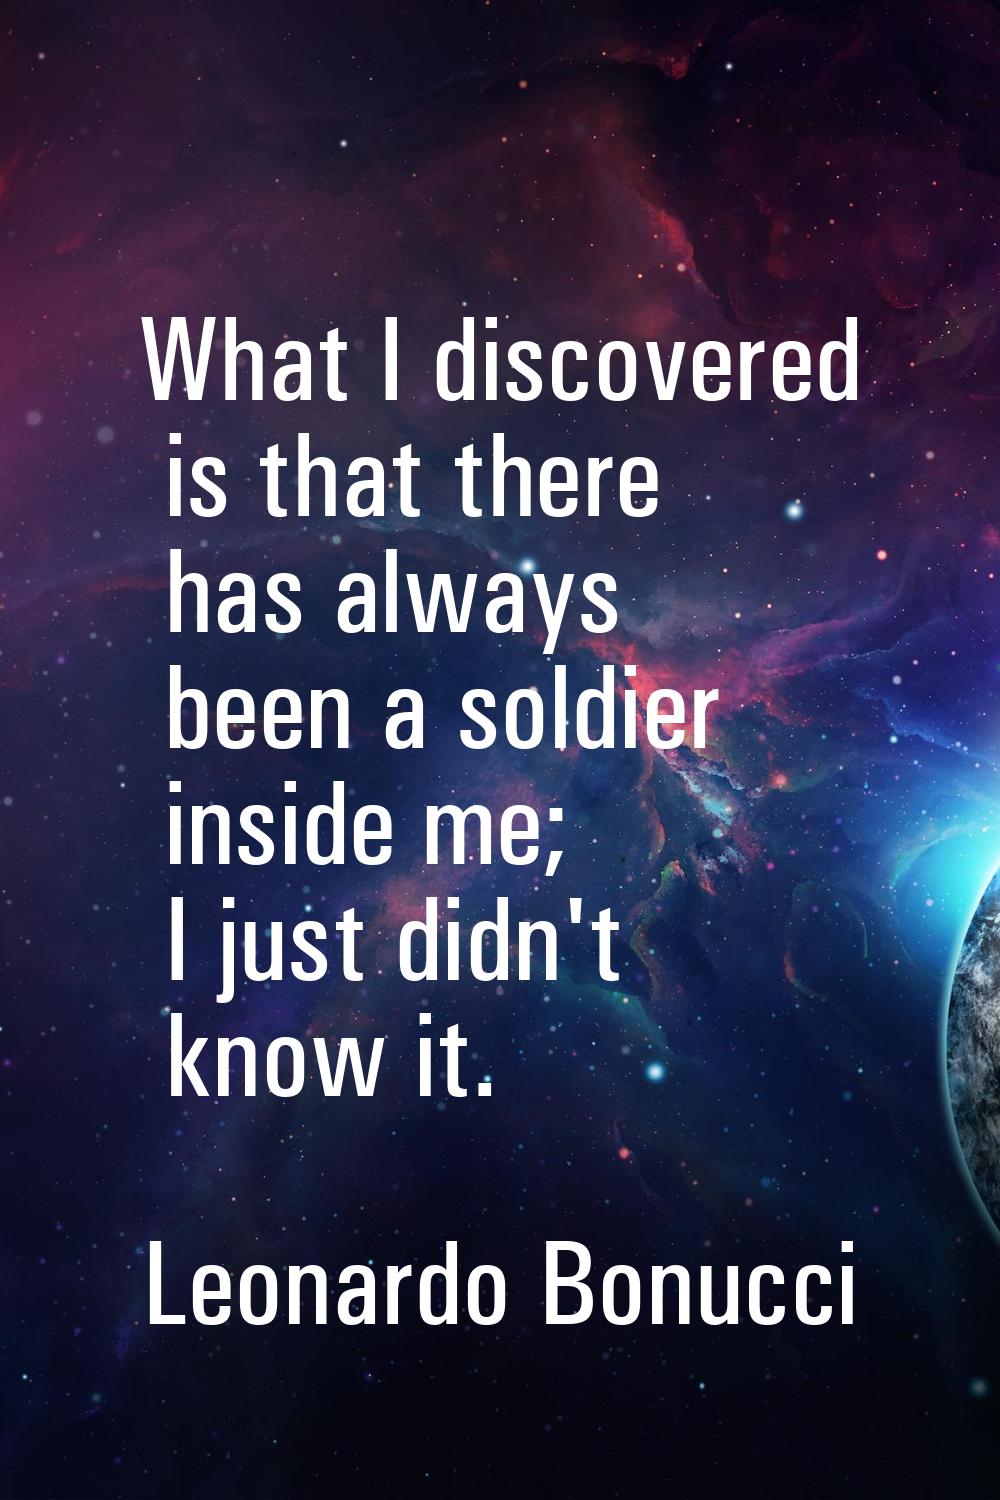 What I discovered is that there has always been a soldier inside me; I just didn't know it.